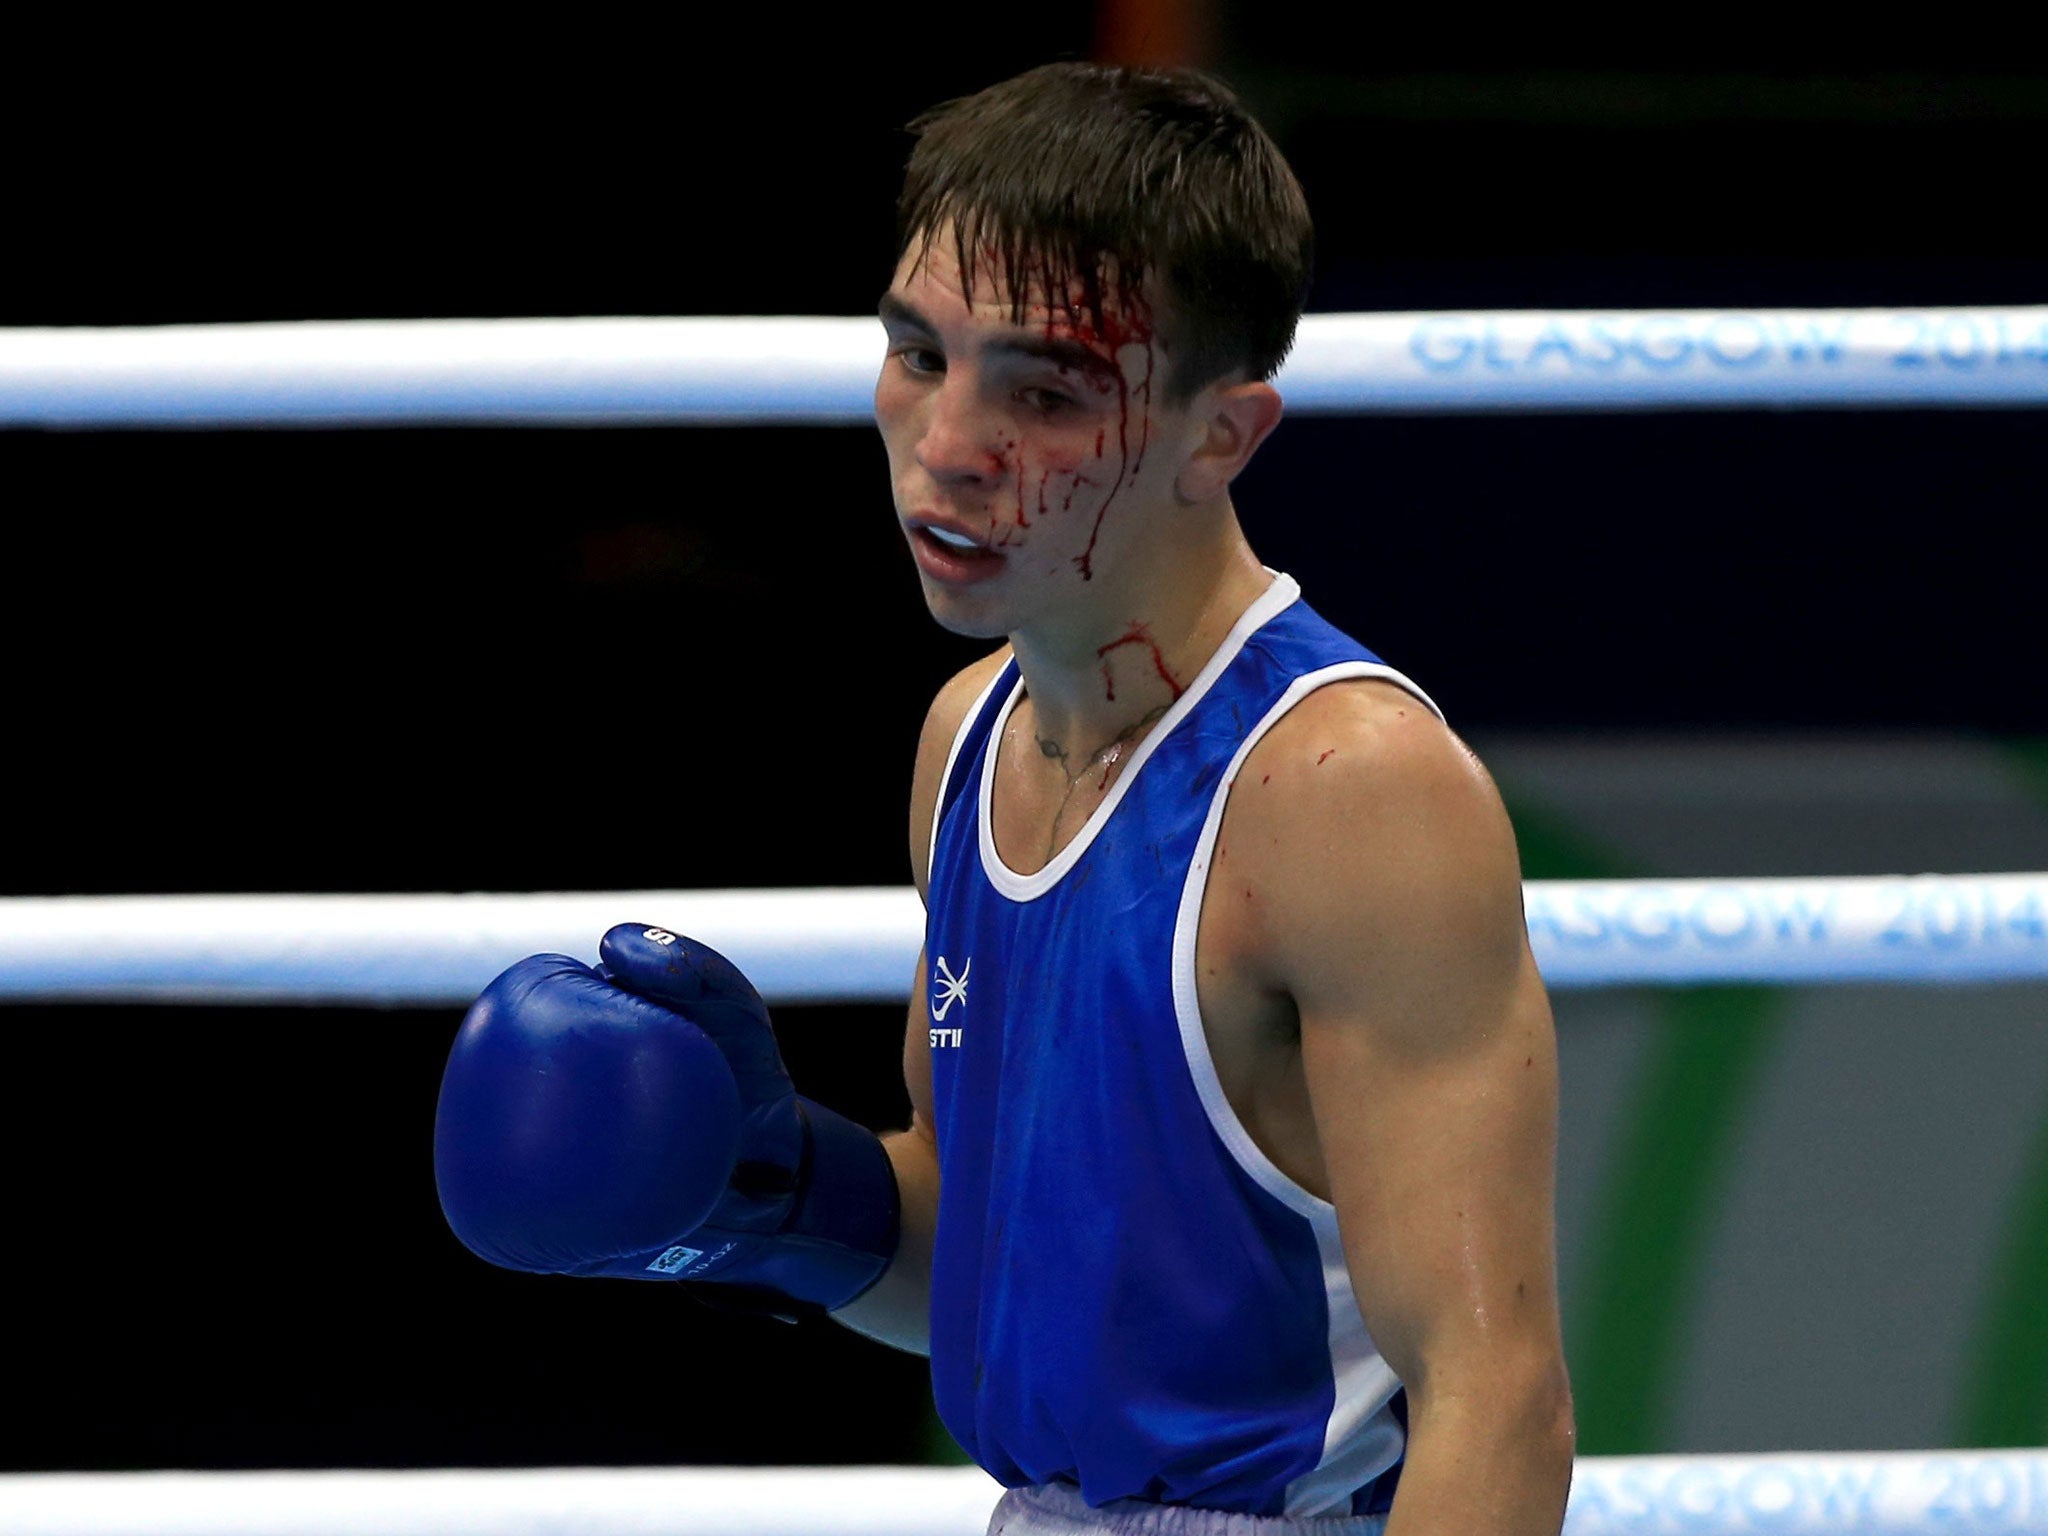 Northern Ireland’s Michael Conlan hung on to win yesterday despite a cut